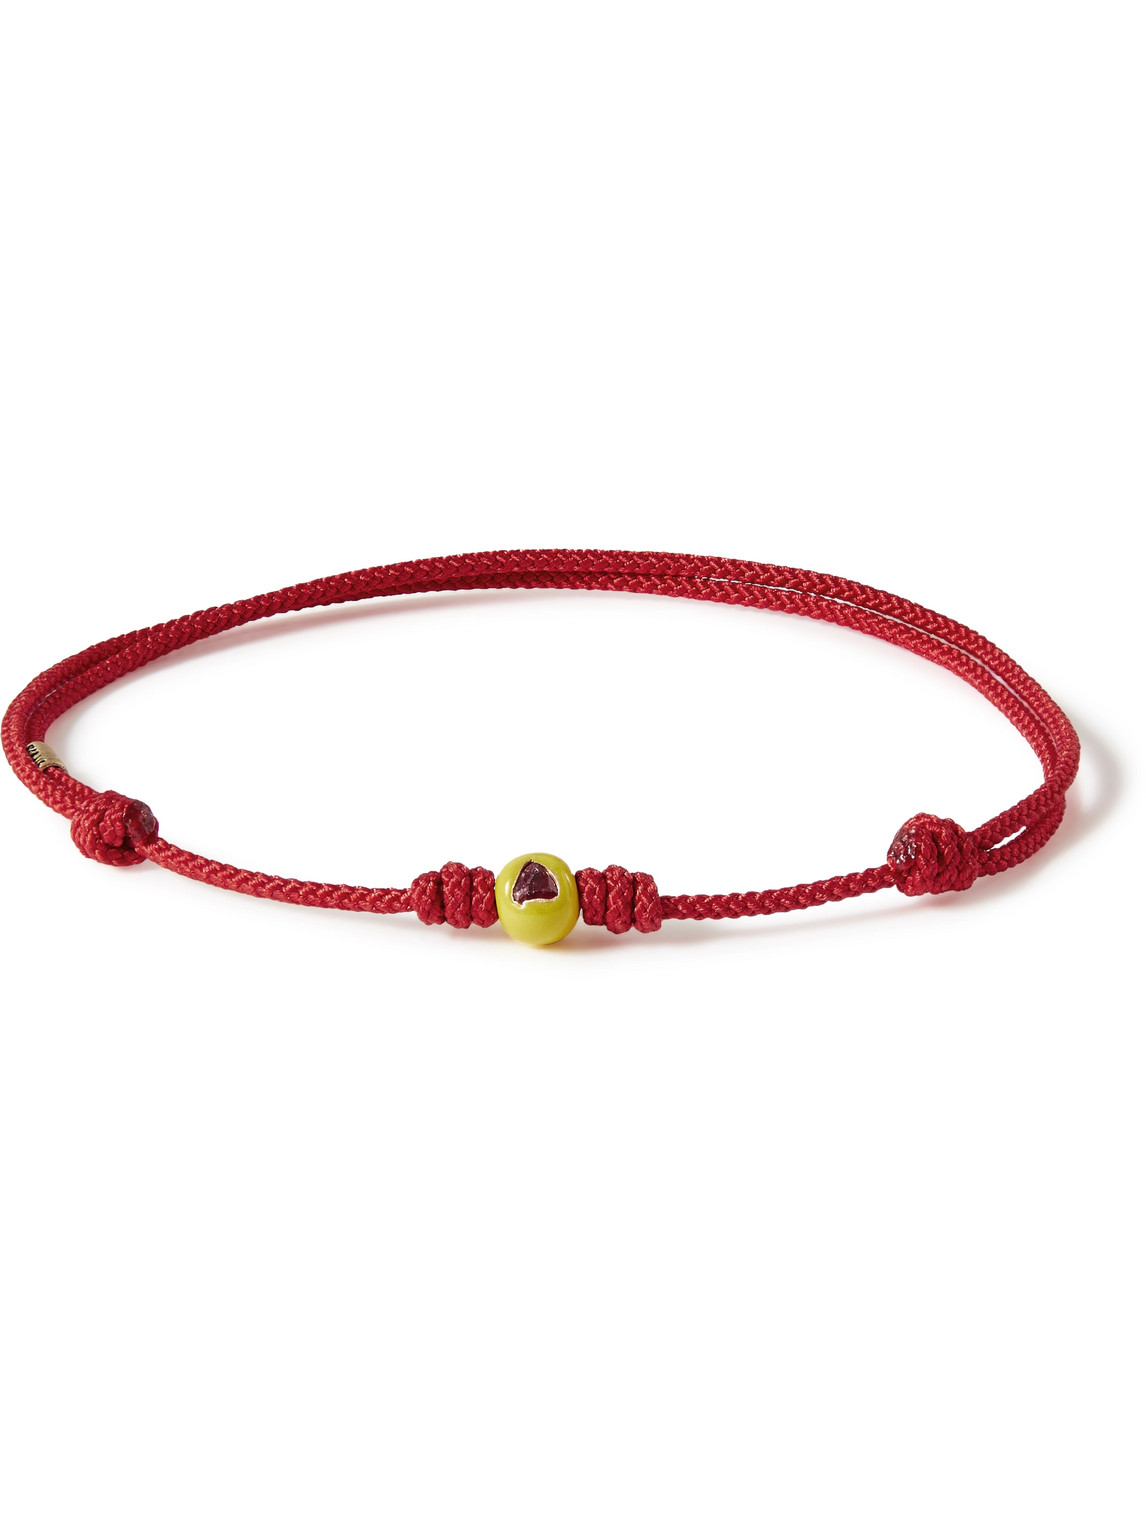 Luis Morais Gold, Enamel, Cord And Ruby Bracelet In Red